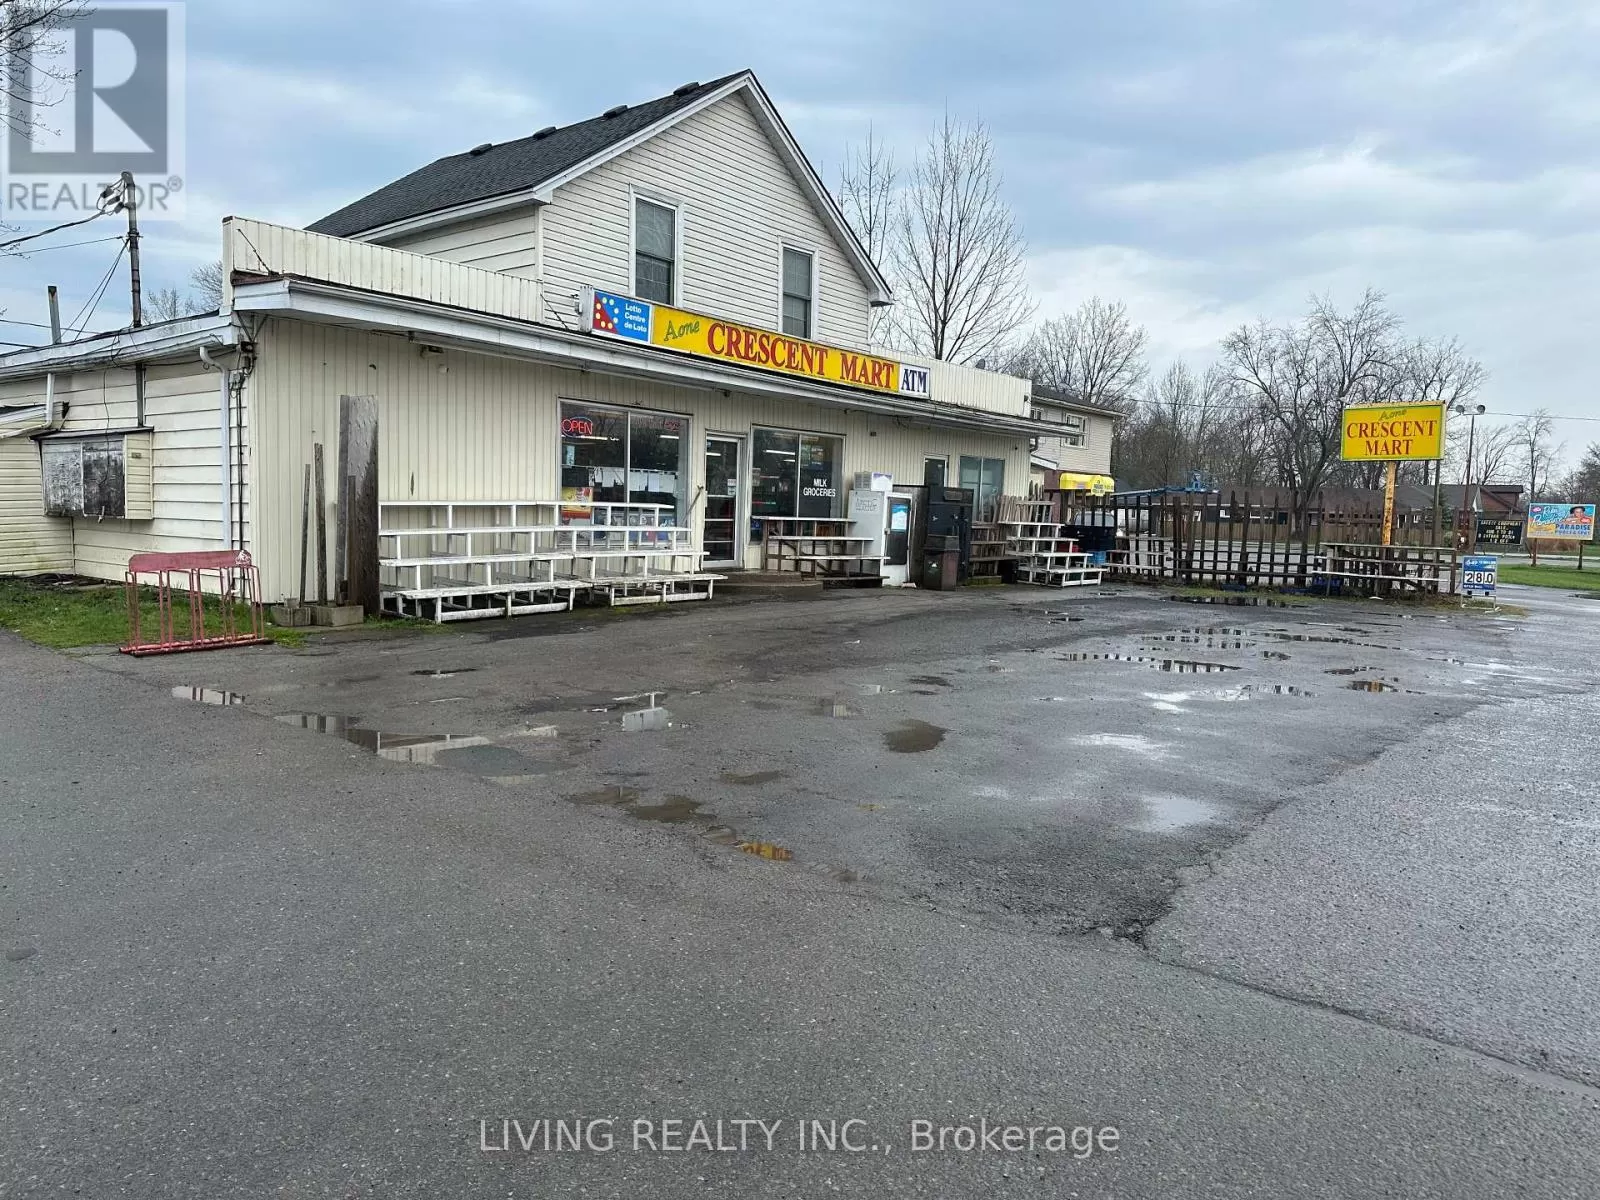 1251 Dominion Road, Fort Erie, Ontario L2A 1H8